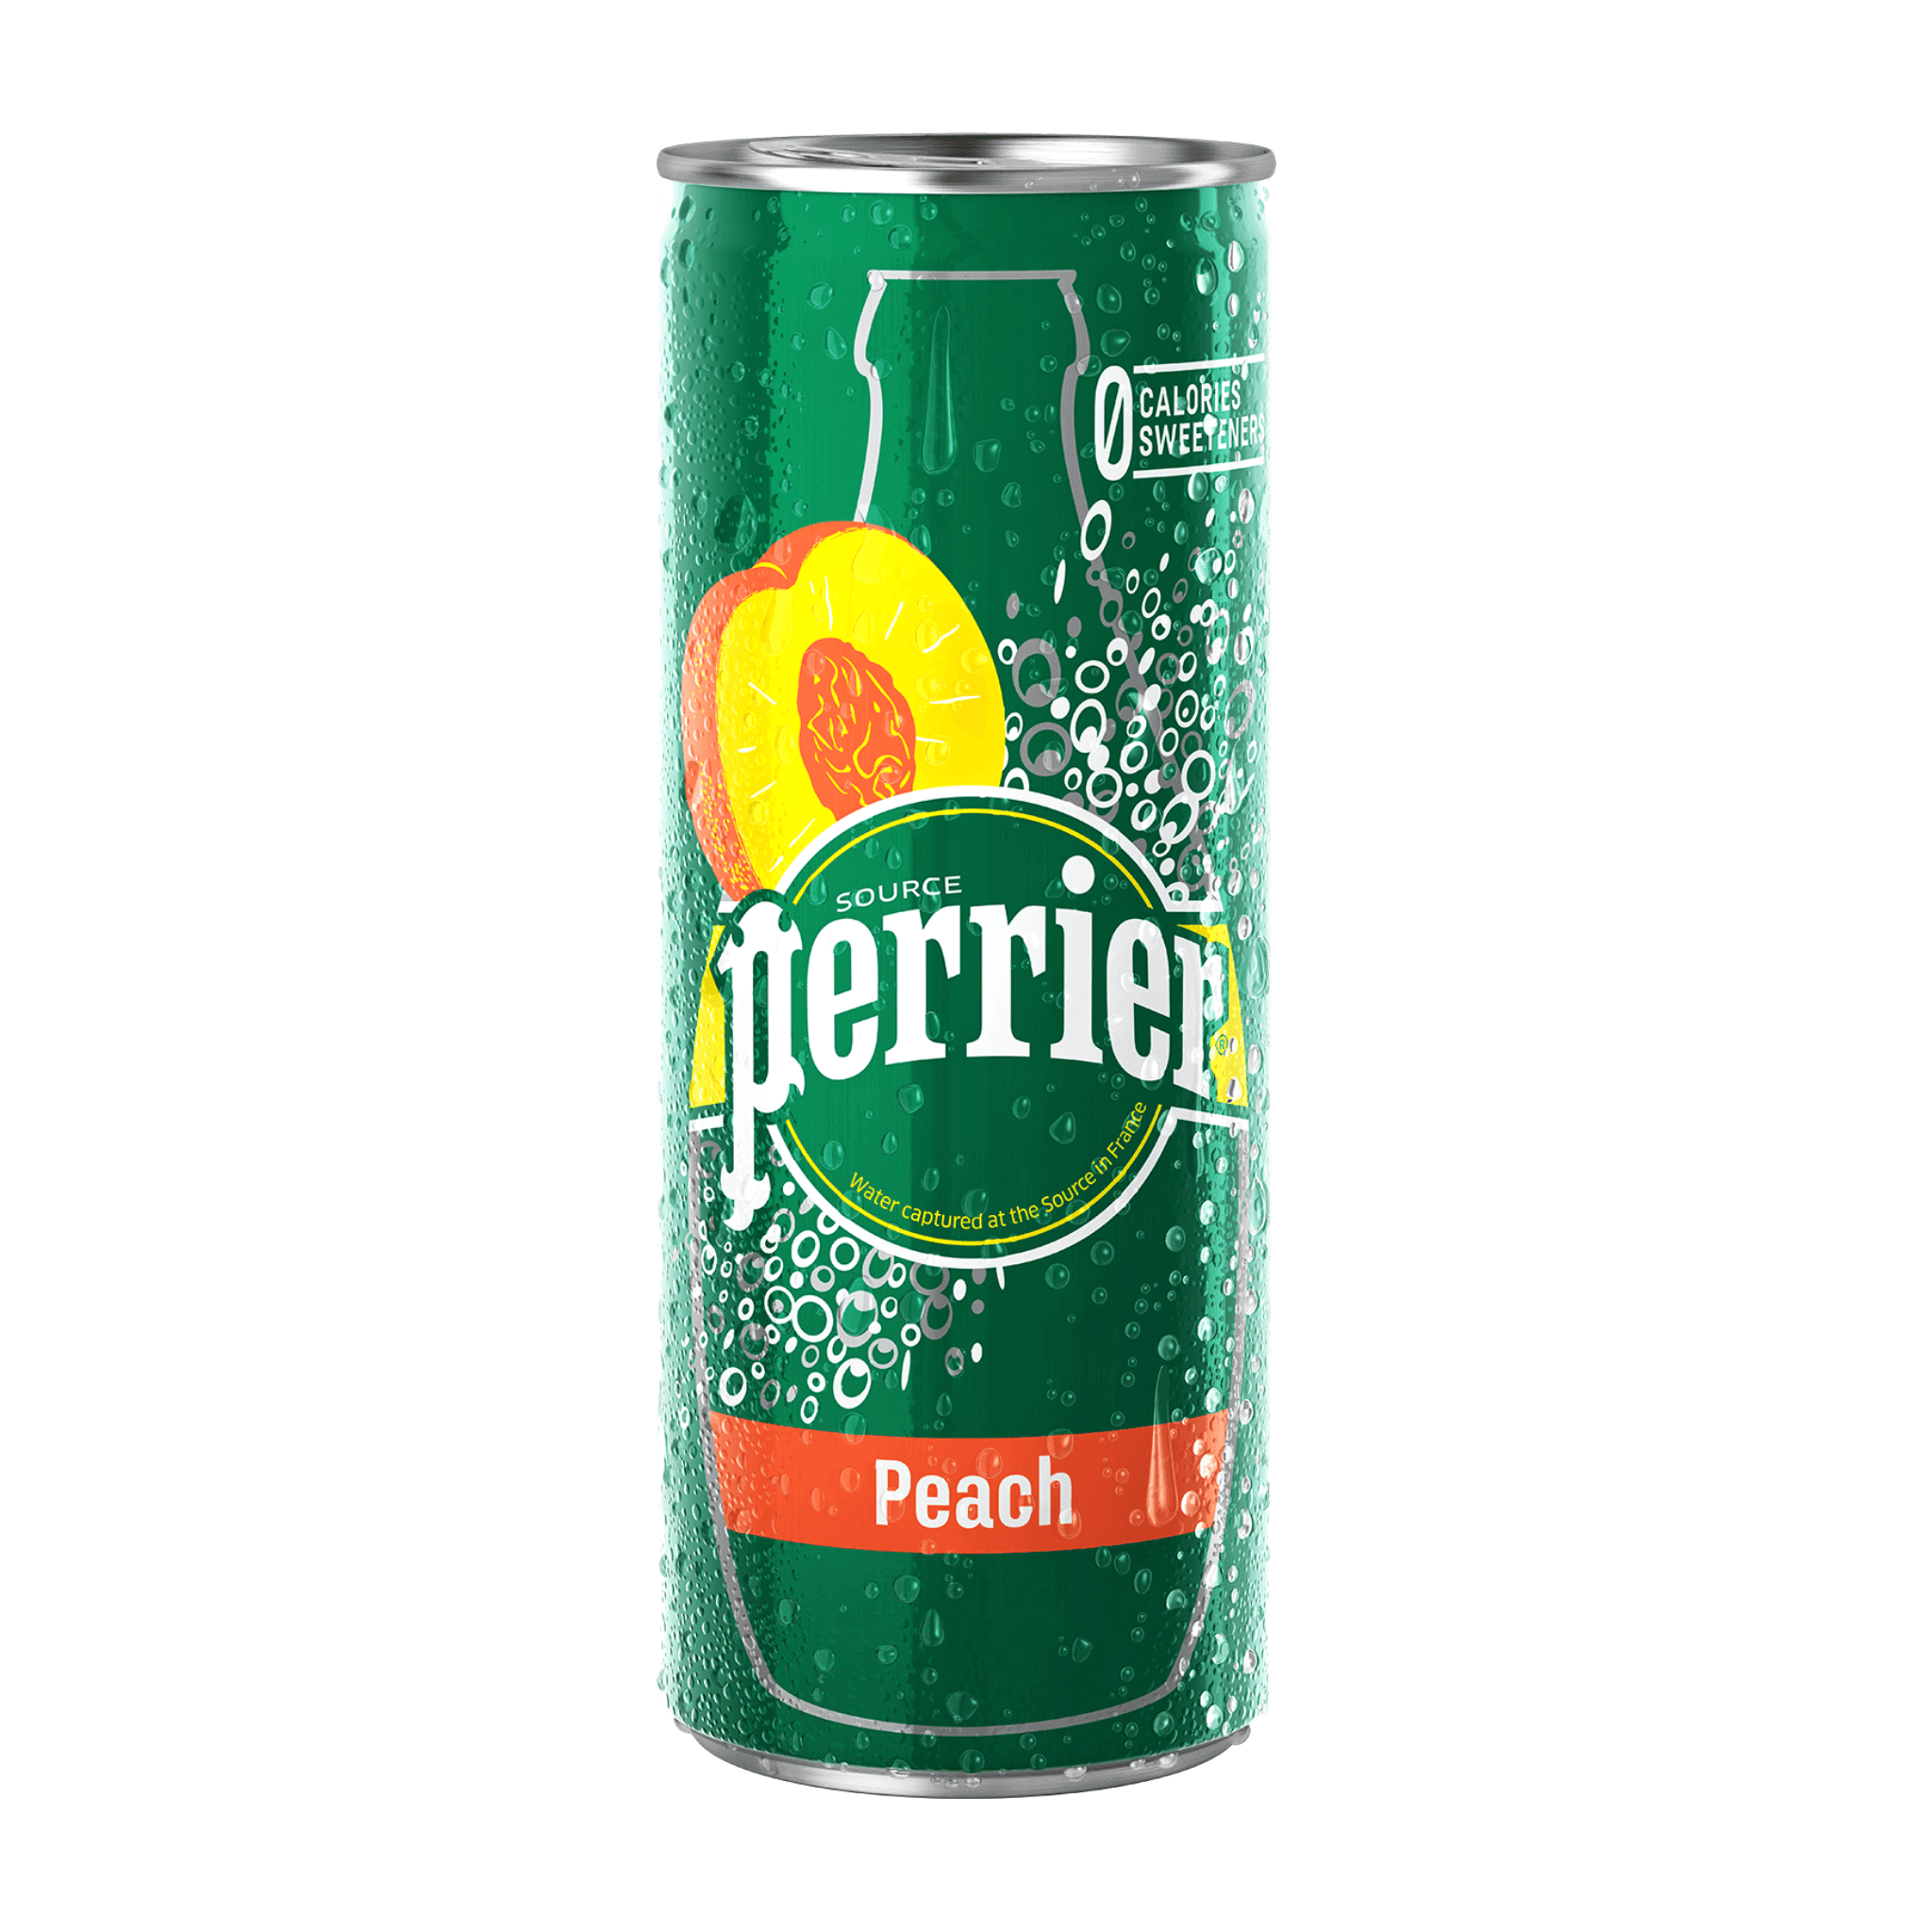 Perrier Peach Sparkling Mineral Water 250ml